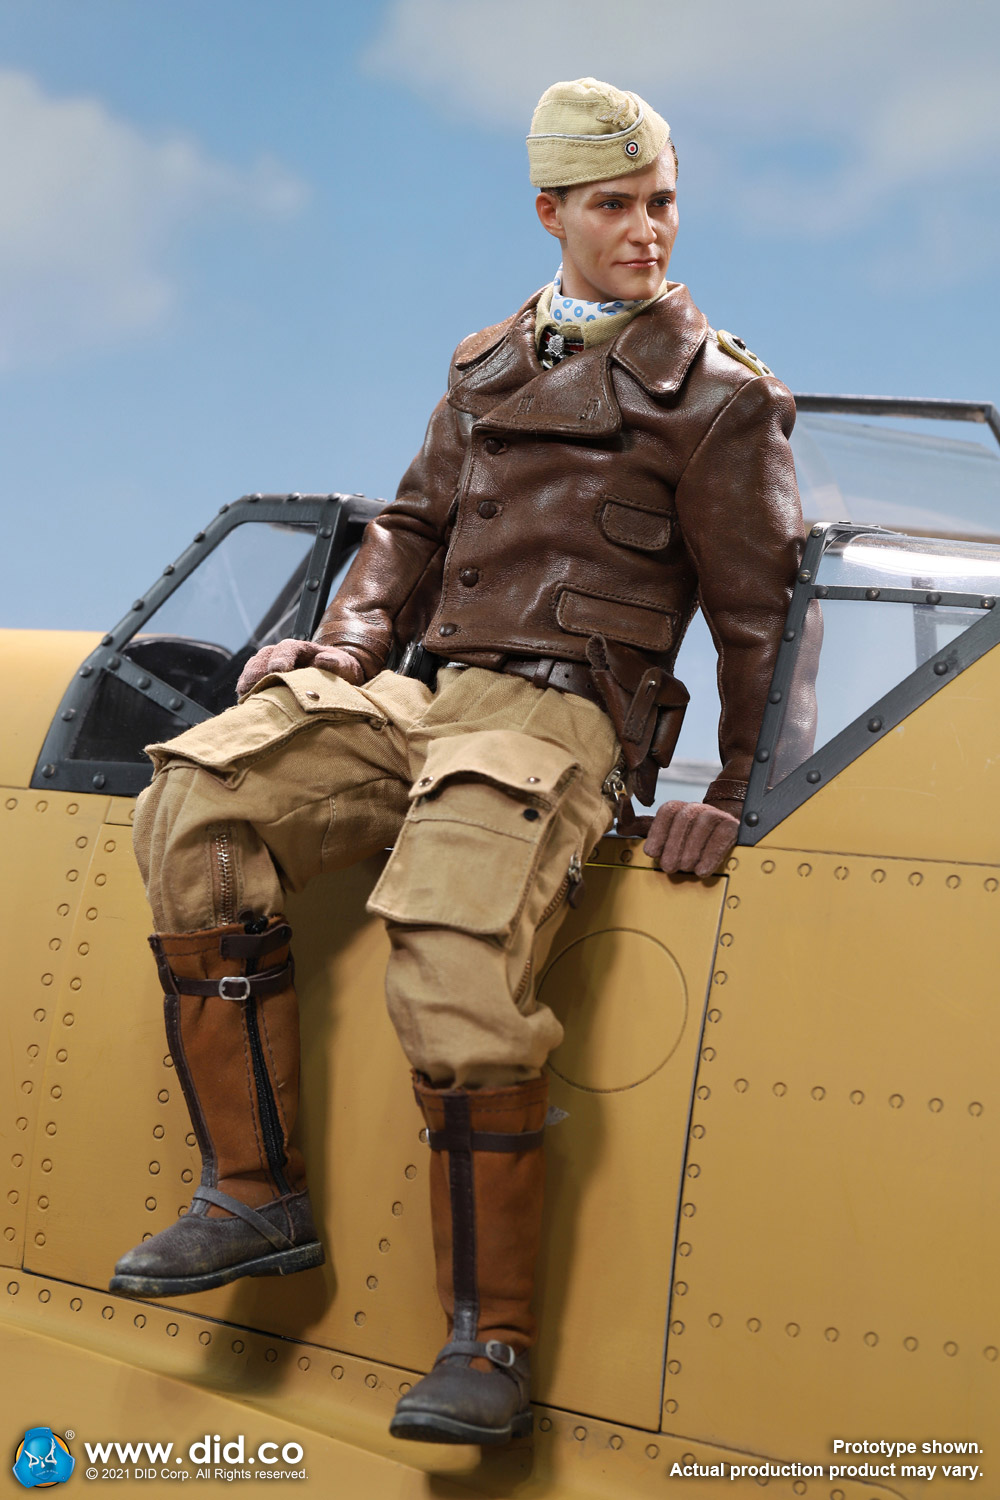 did - NEW PRODUCT: D80154 WWII German Luftwaffe Flying Ace “Star Of Africa” – Hans-Joachim Marseille & E60060  Diorama Of “Star Of Africa” 18243